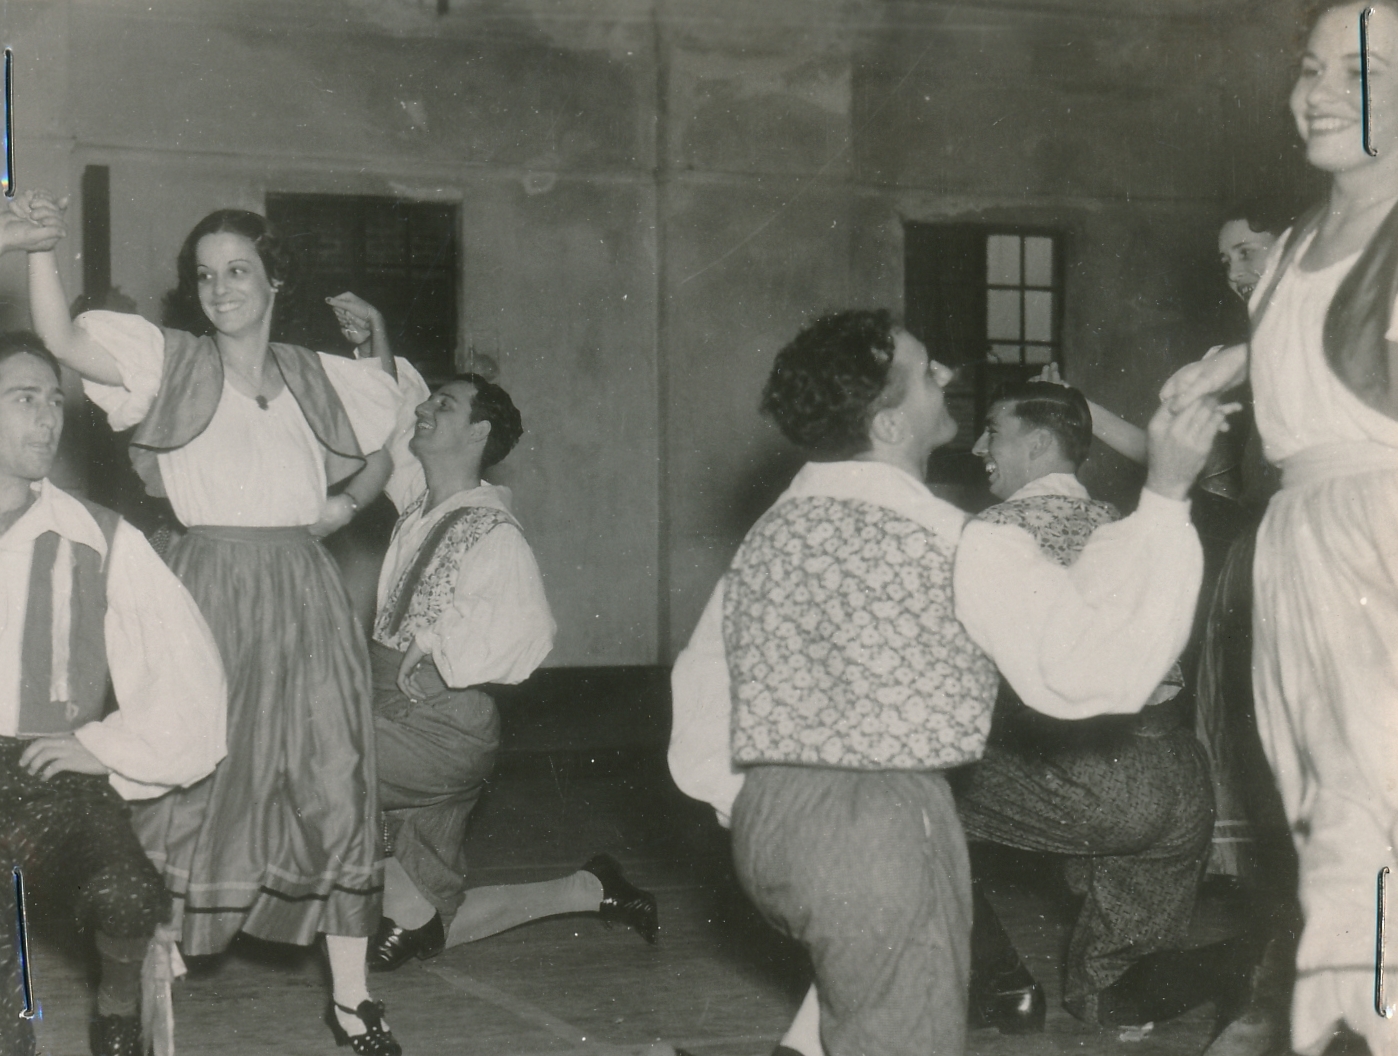 Dance can lift the spirits, as this WPA adult recreation project in Louisiana shows. Photo courtesy of the National Archives (ca. 1935-1943).